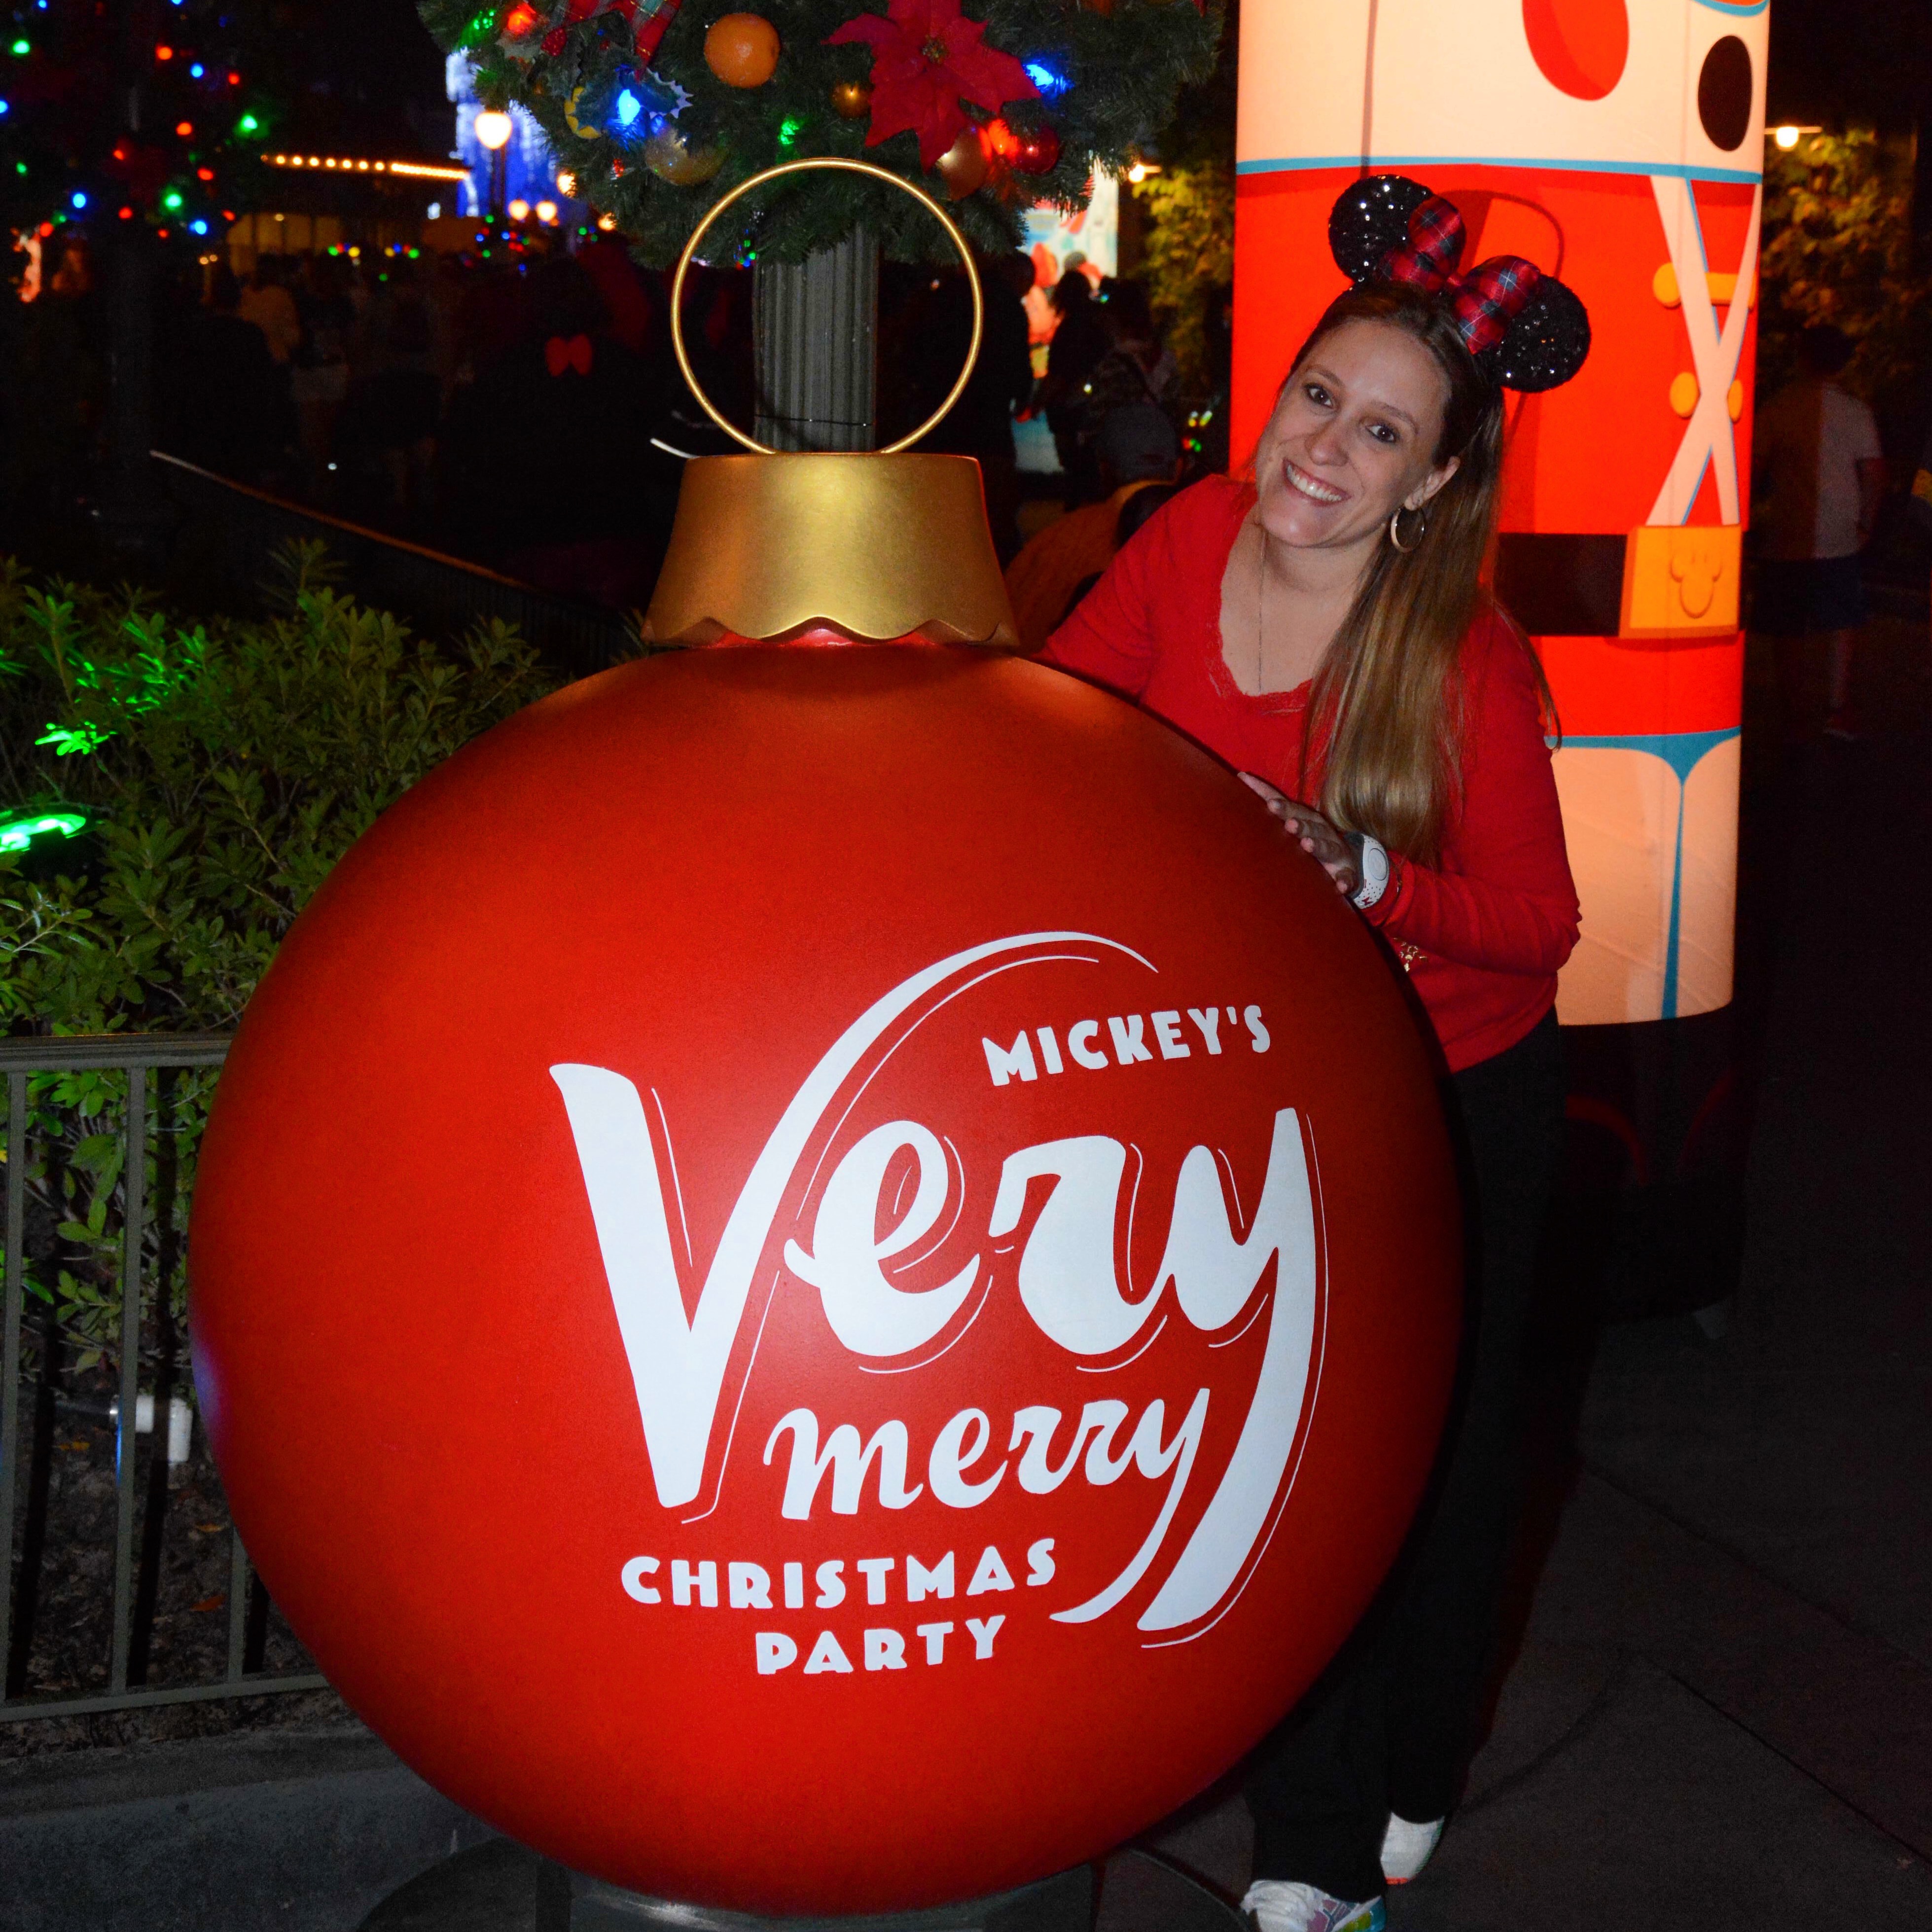 Mickey’s Verry Merry Christmas Party